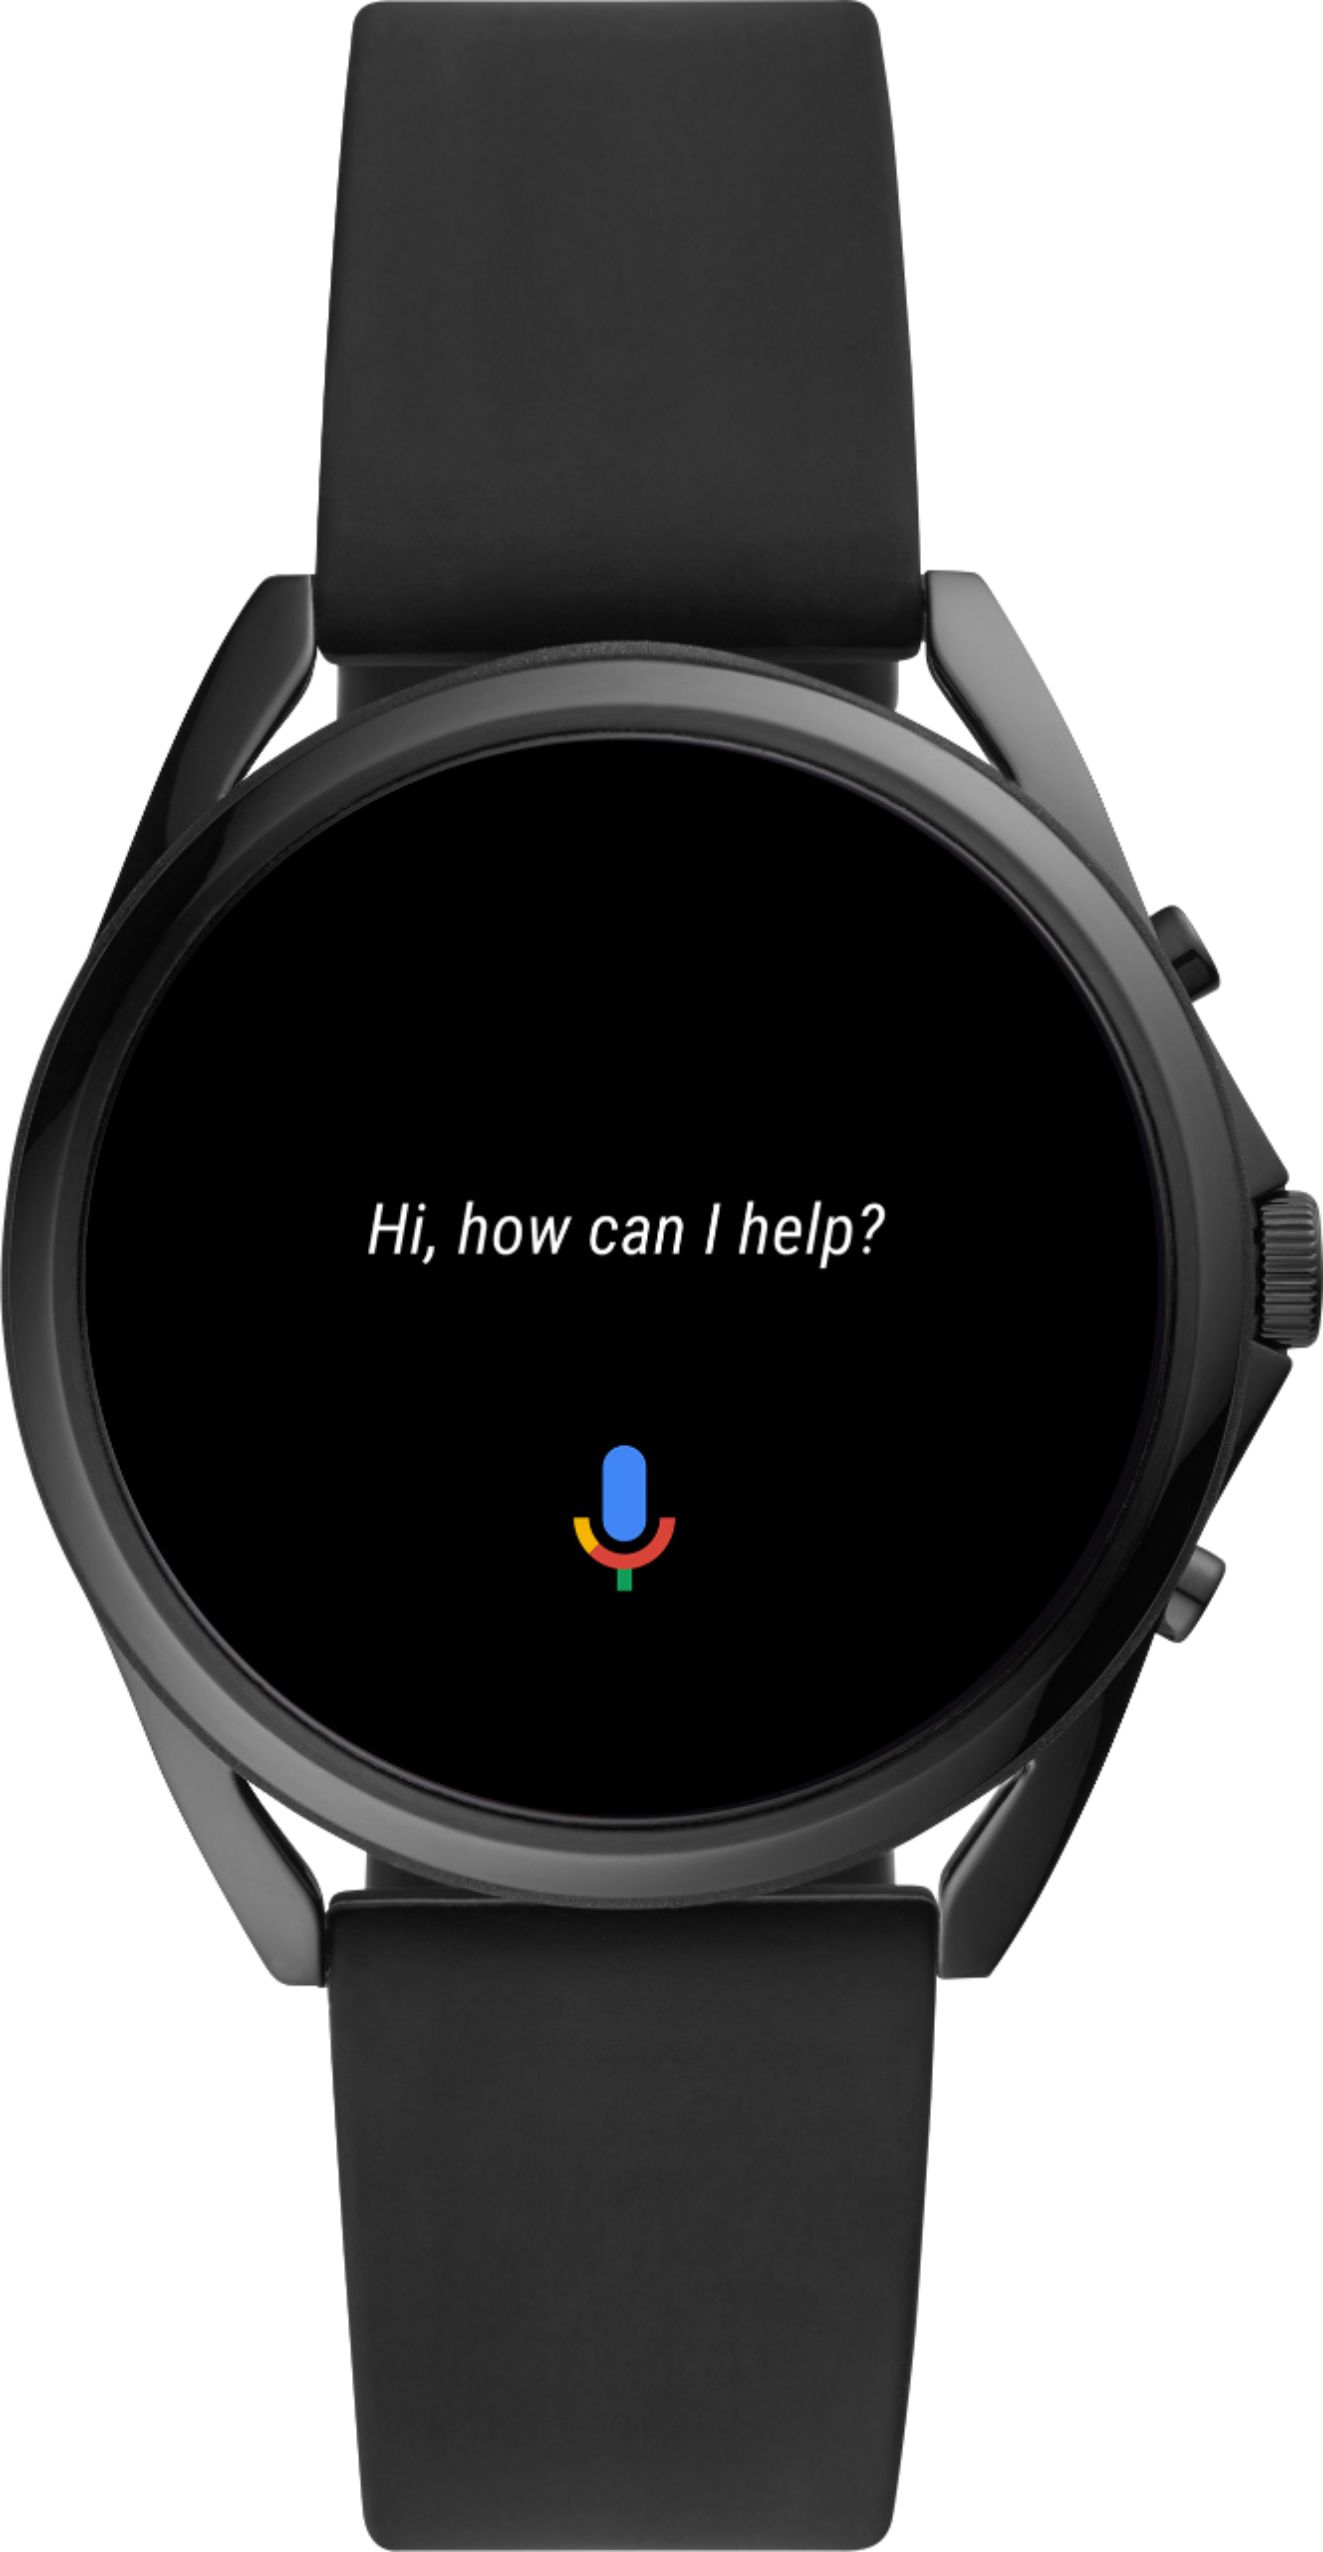 Do You Need LTE Support on Your Smartwatch?